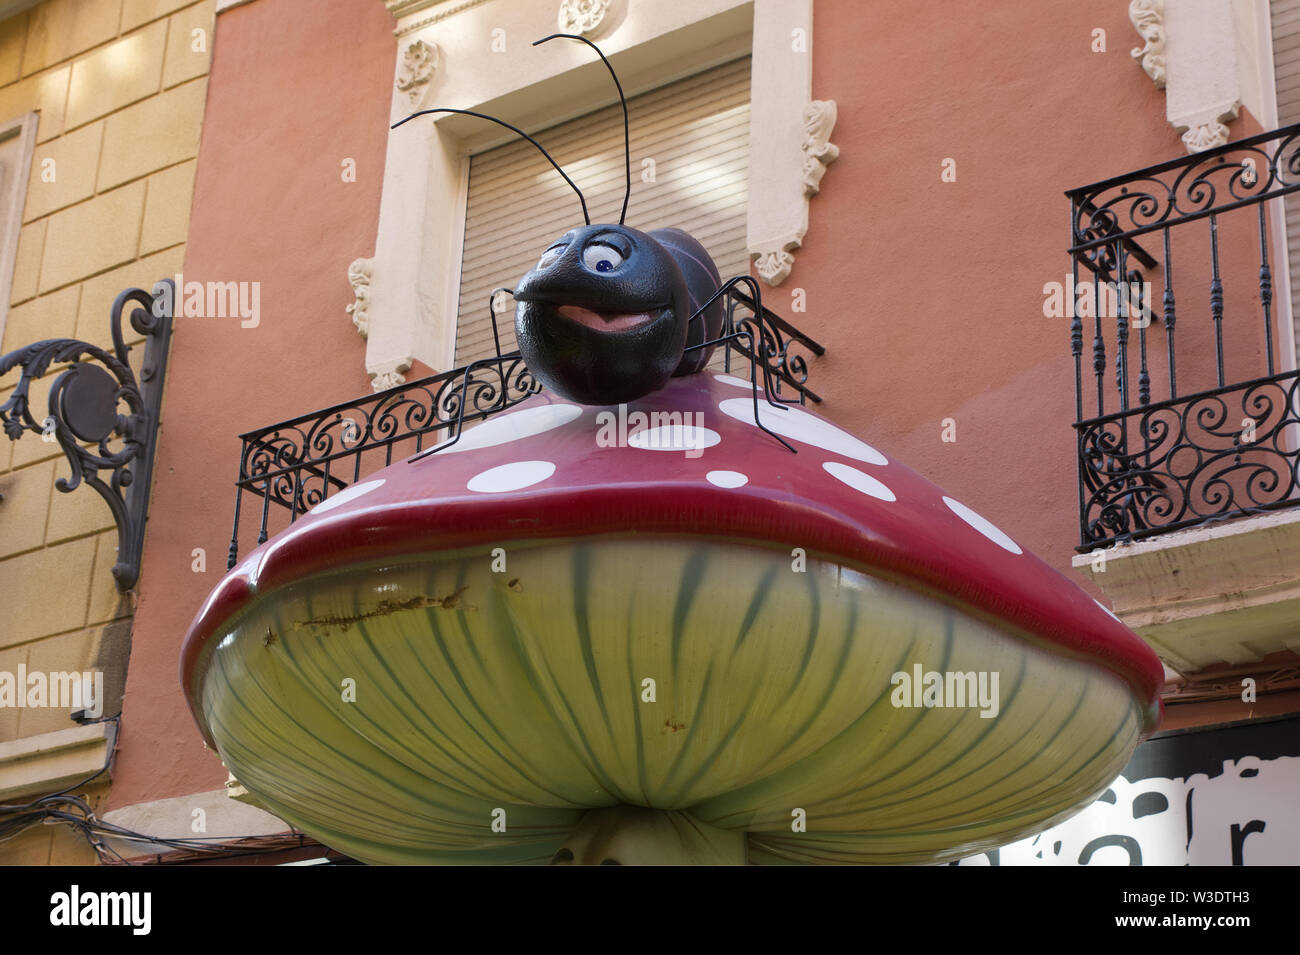 Carrer de Sant Francesc in Alicante, Spain. City street with unusual sculptures of mushrooms and fungi with insects. Stock Photo